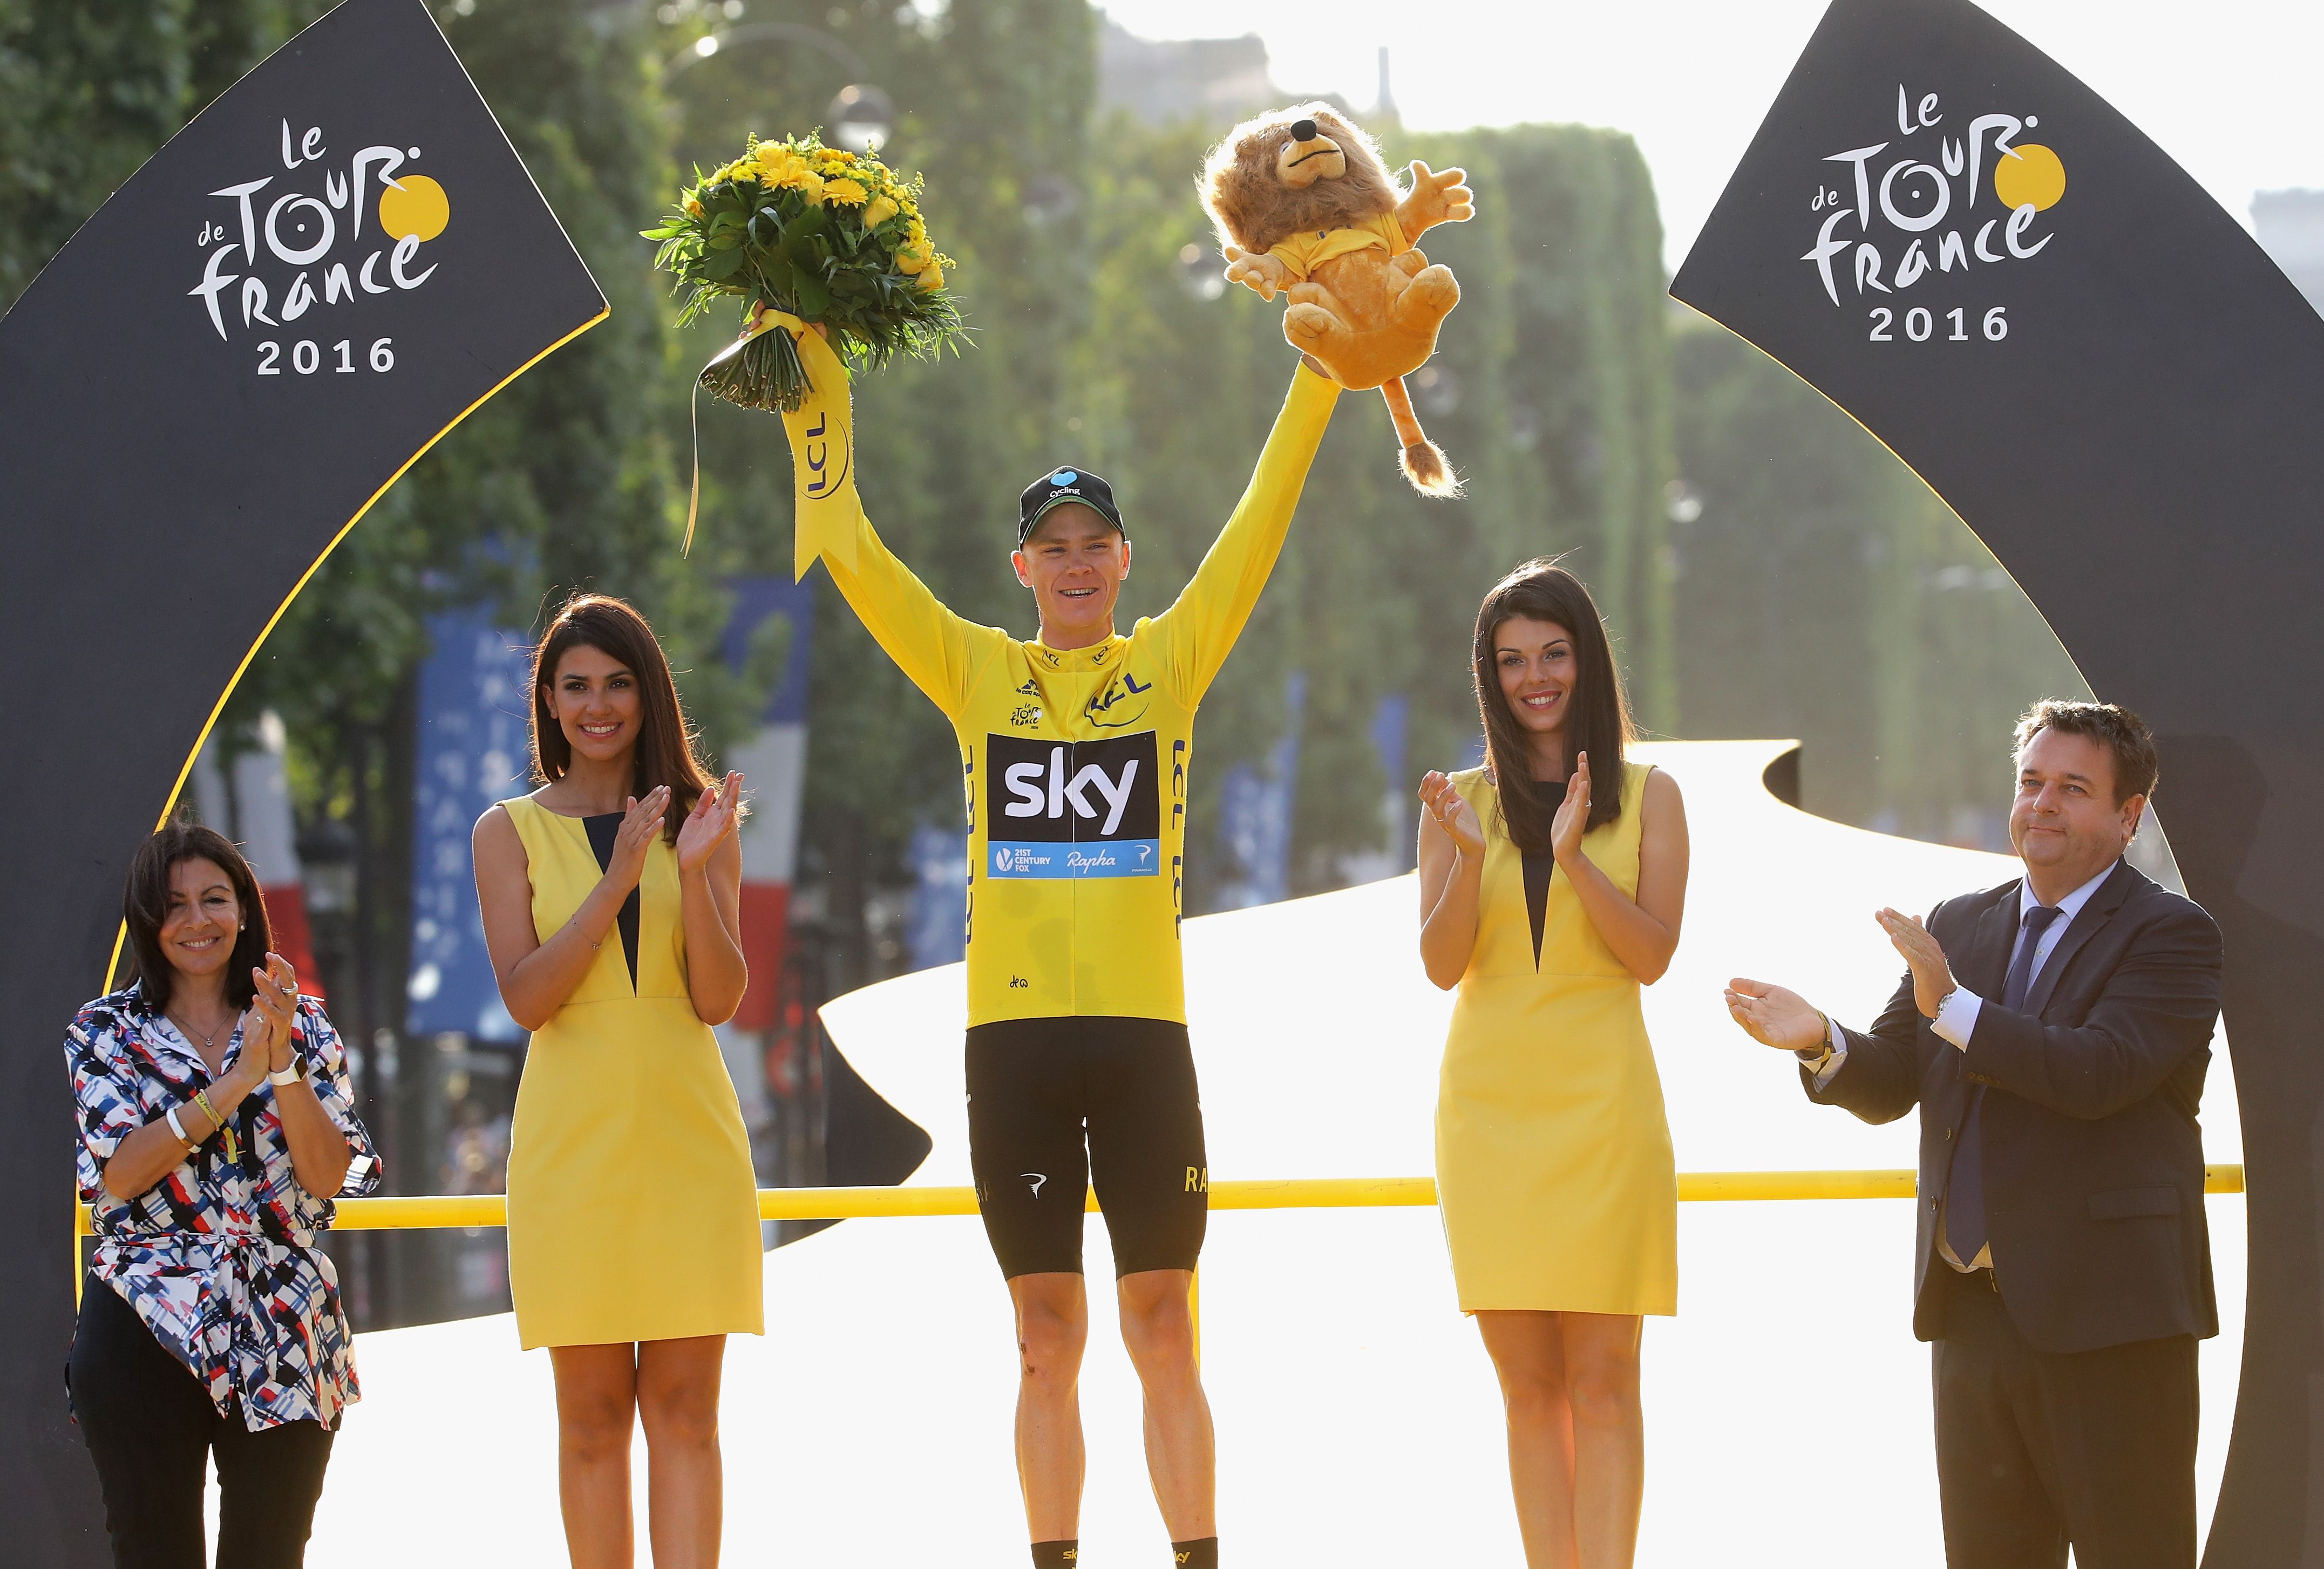 Chris Froome wins stage one of Tour de France 2016